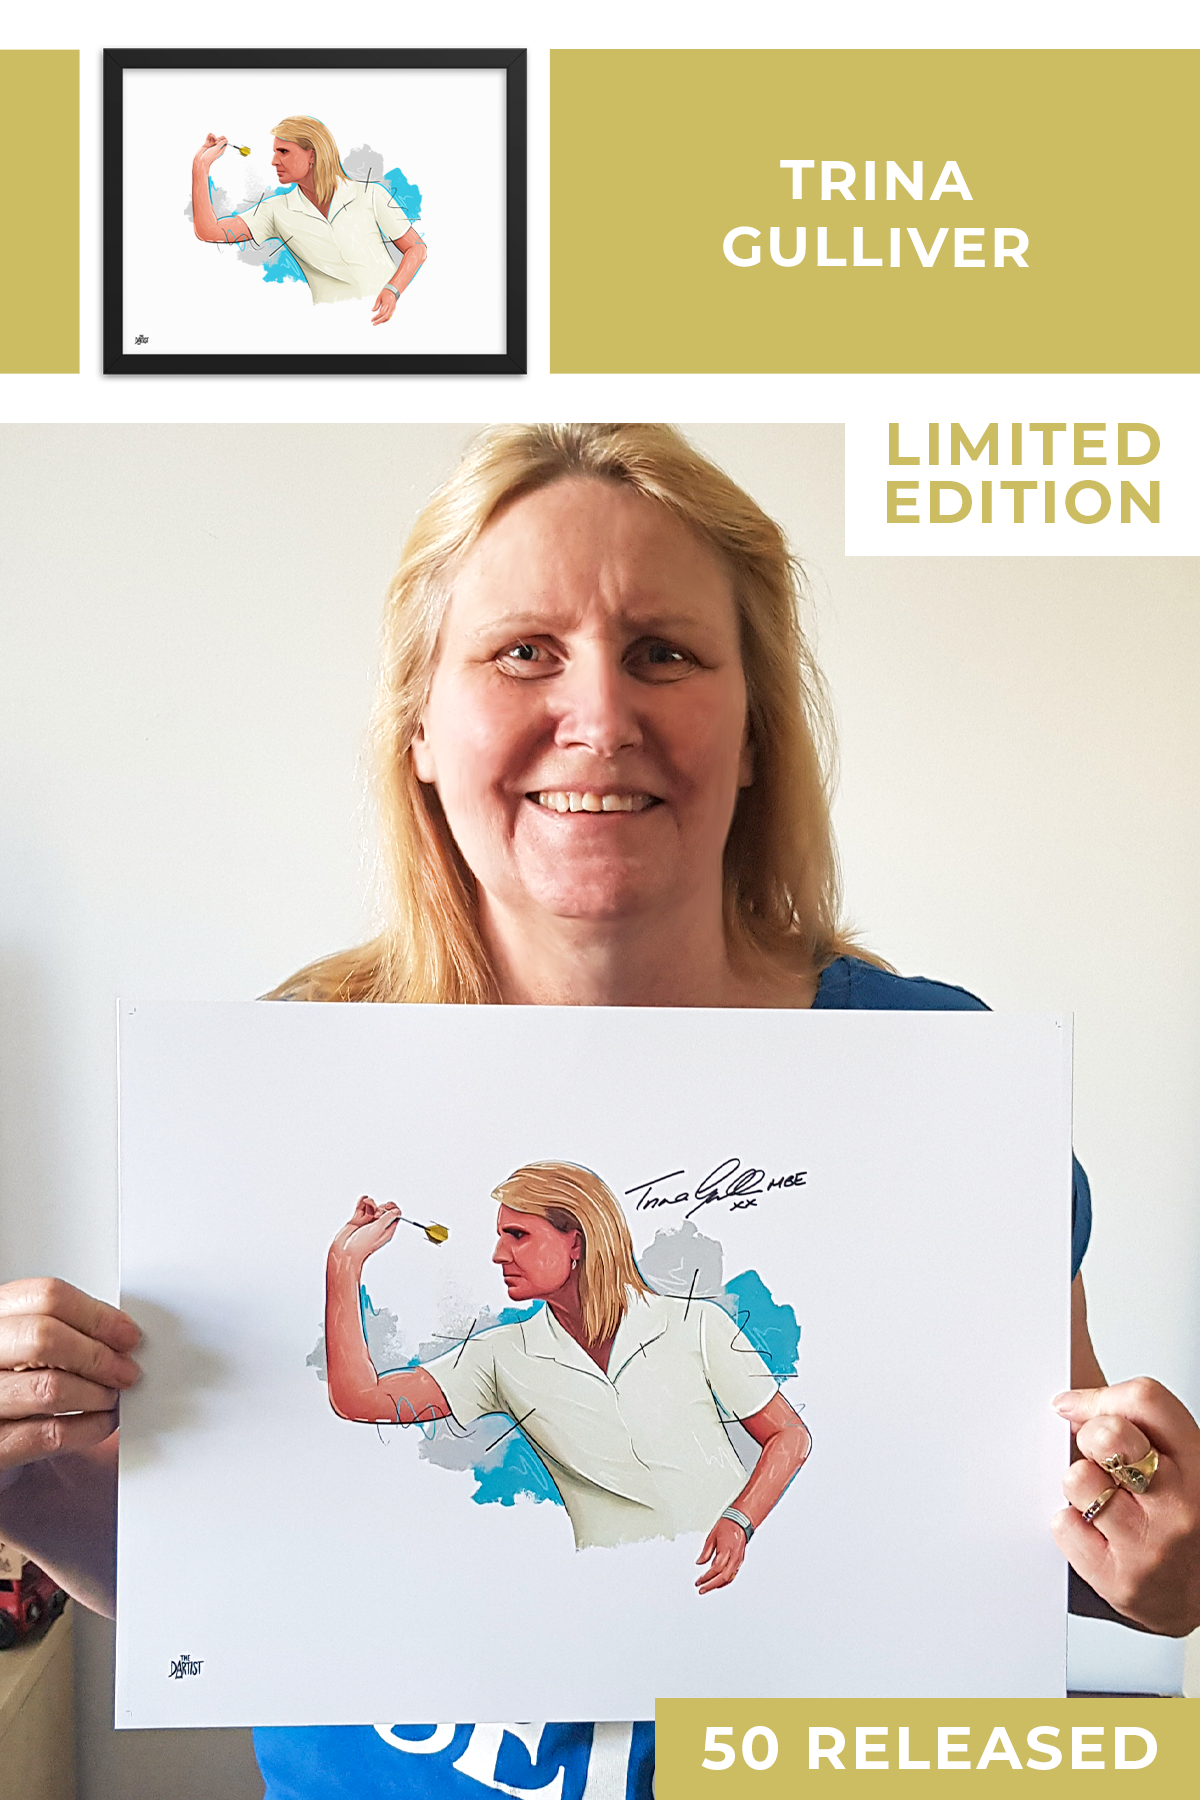 Trina Gulliver MBE Limited Edition Signed Art Print - The Dartist